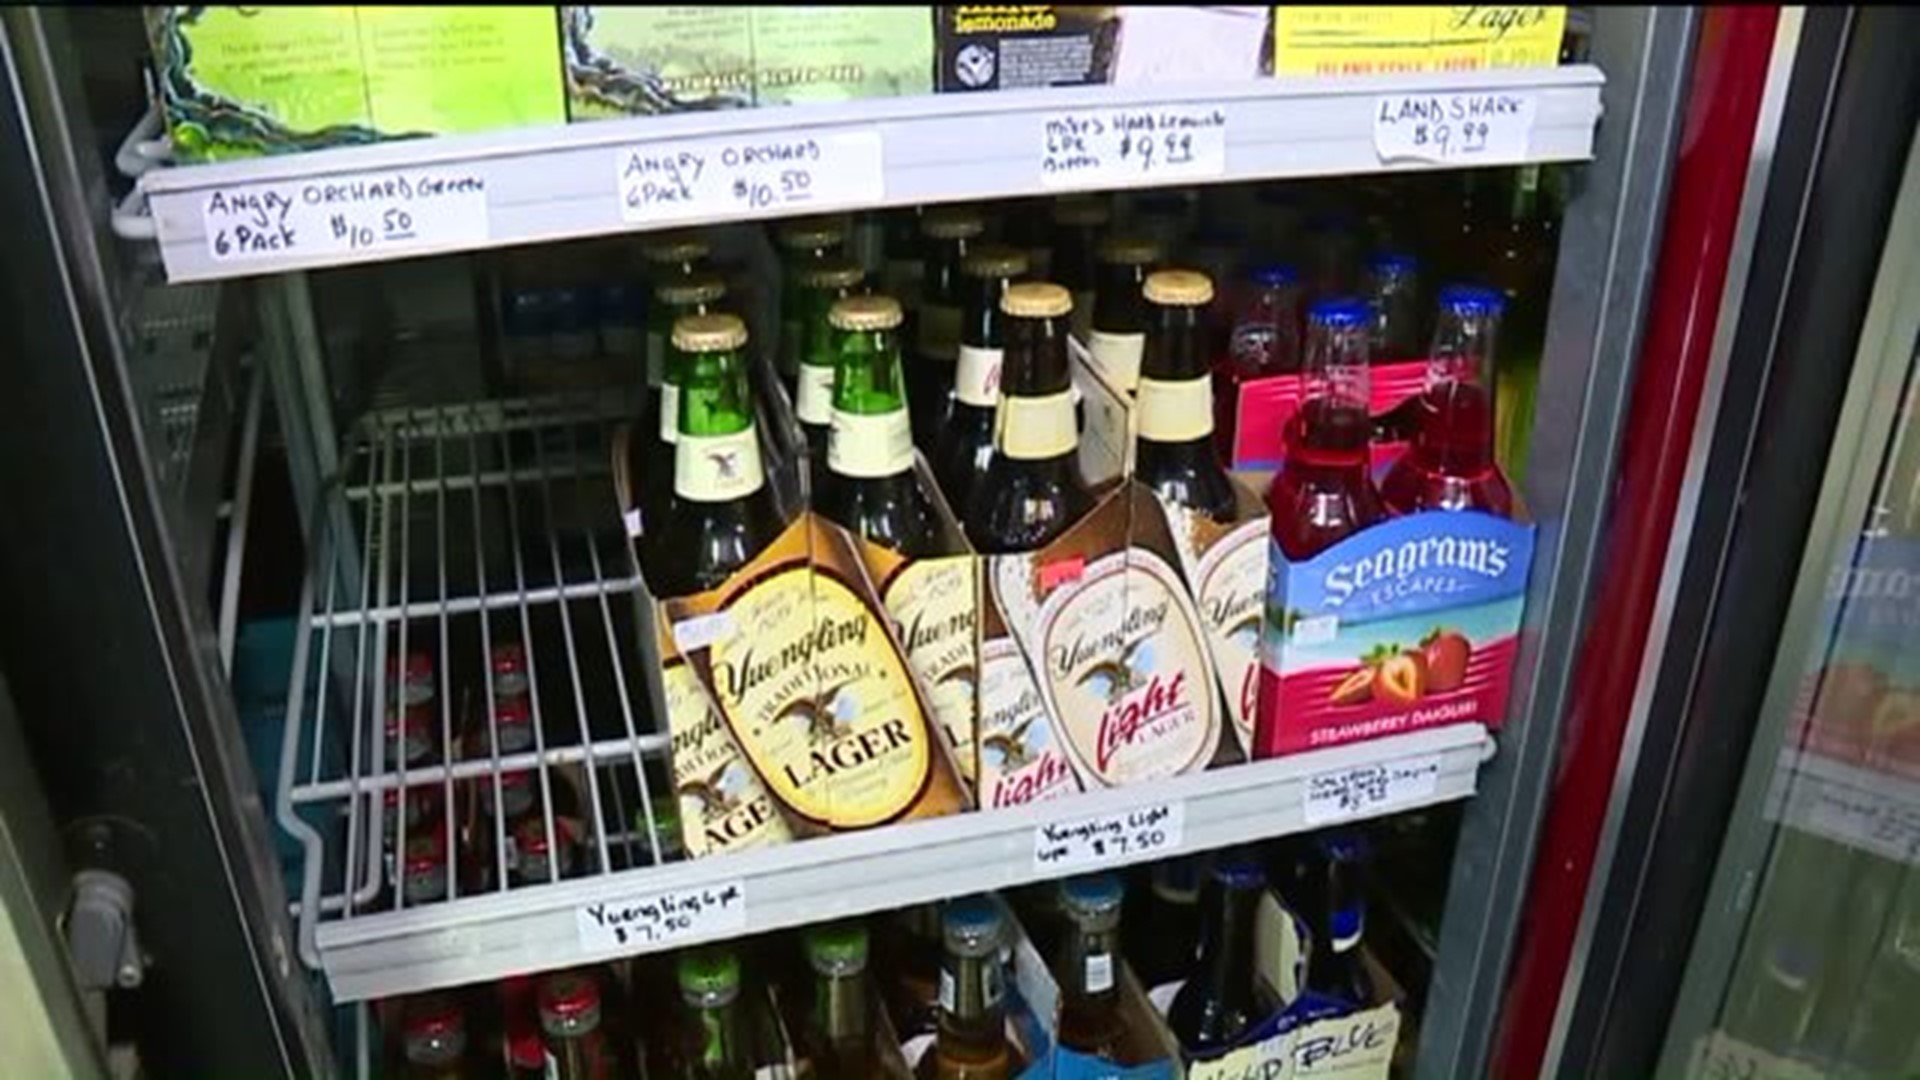 Governor Wolf Signs Six-Pack Sales Bill